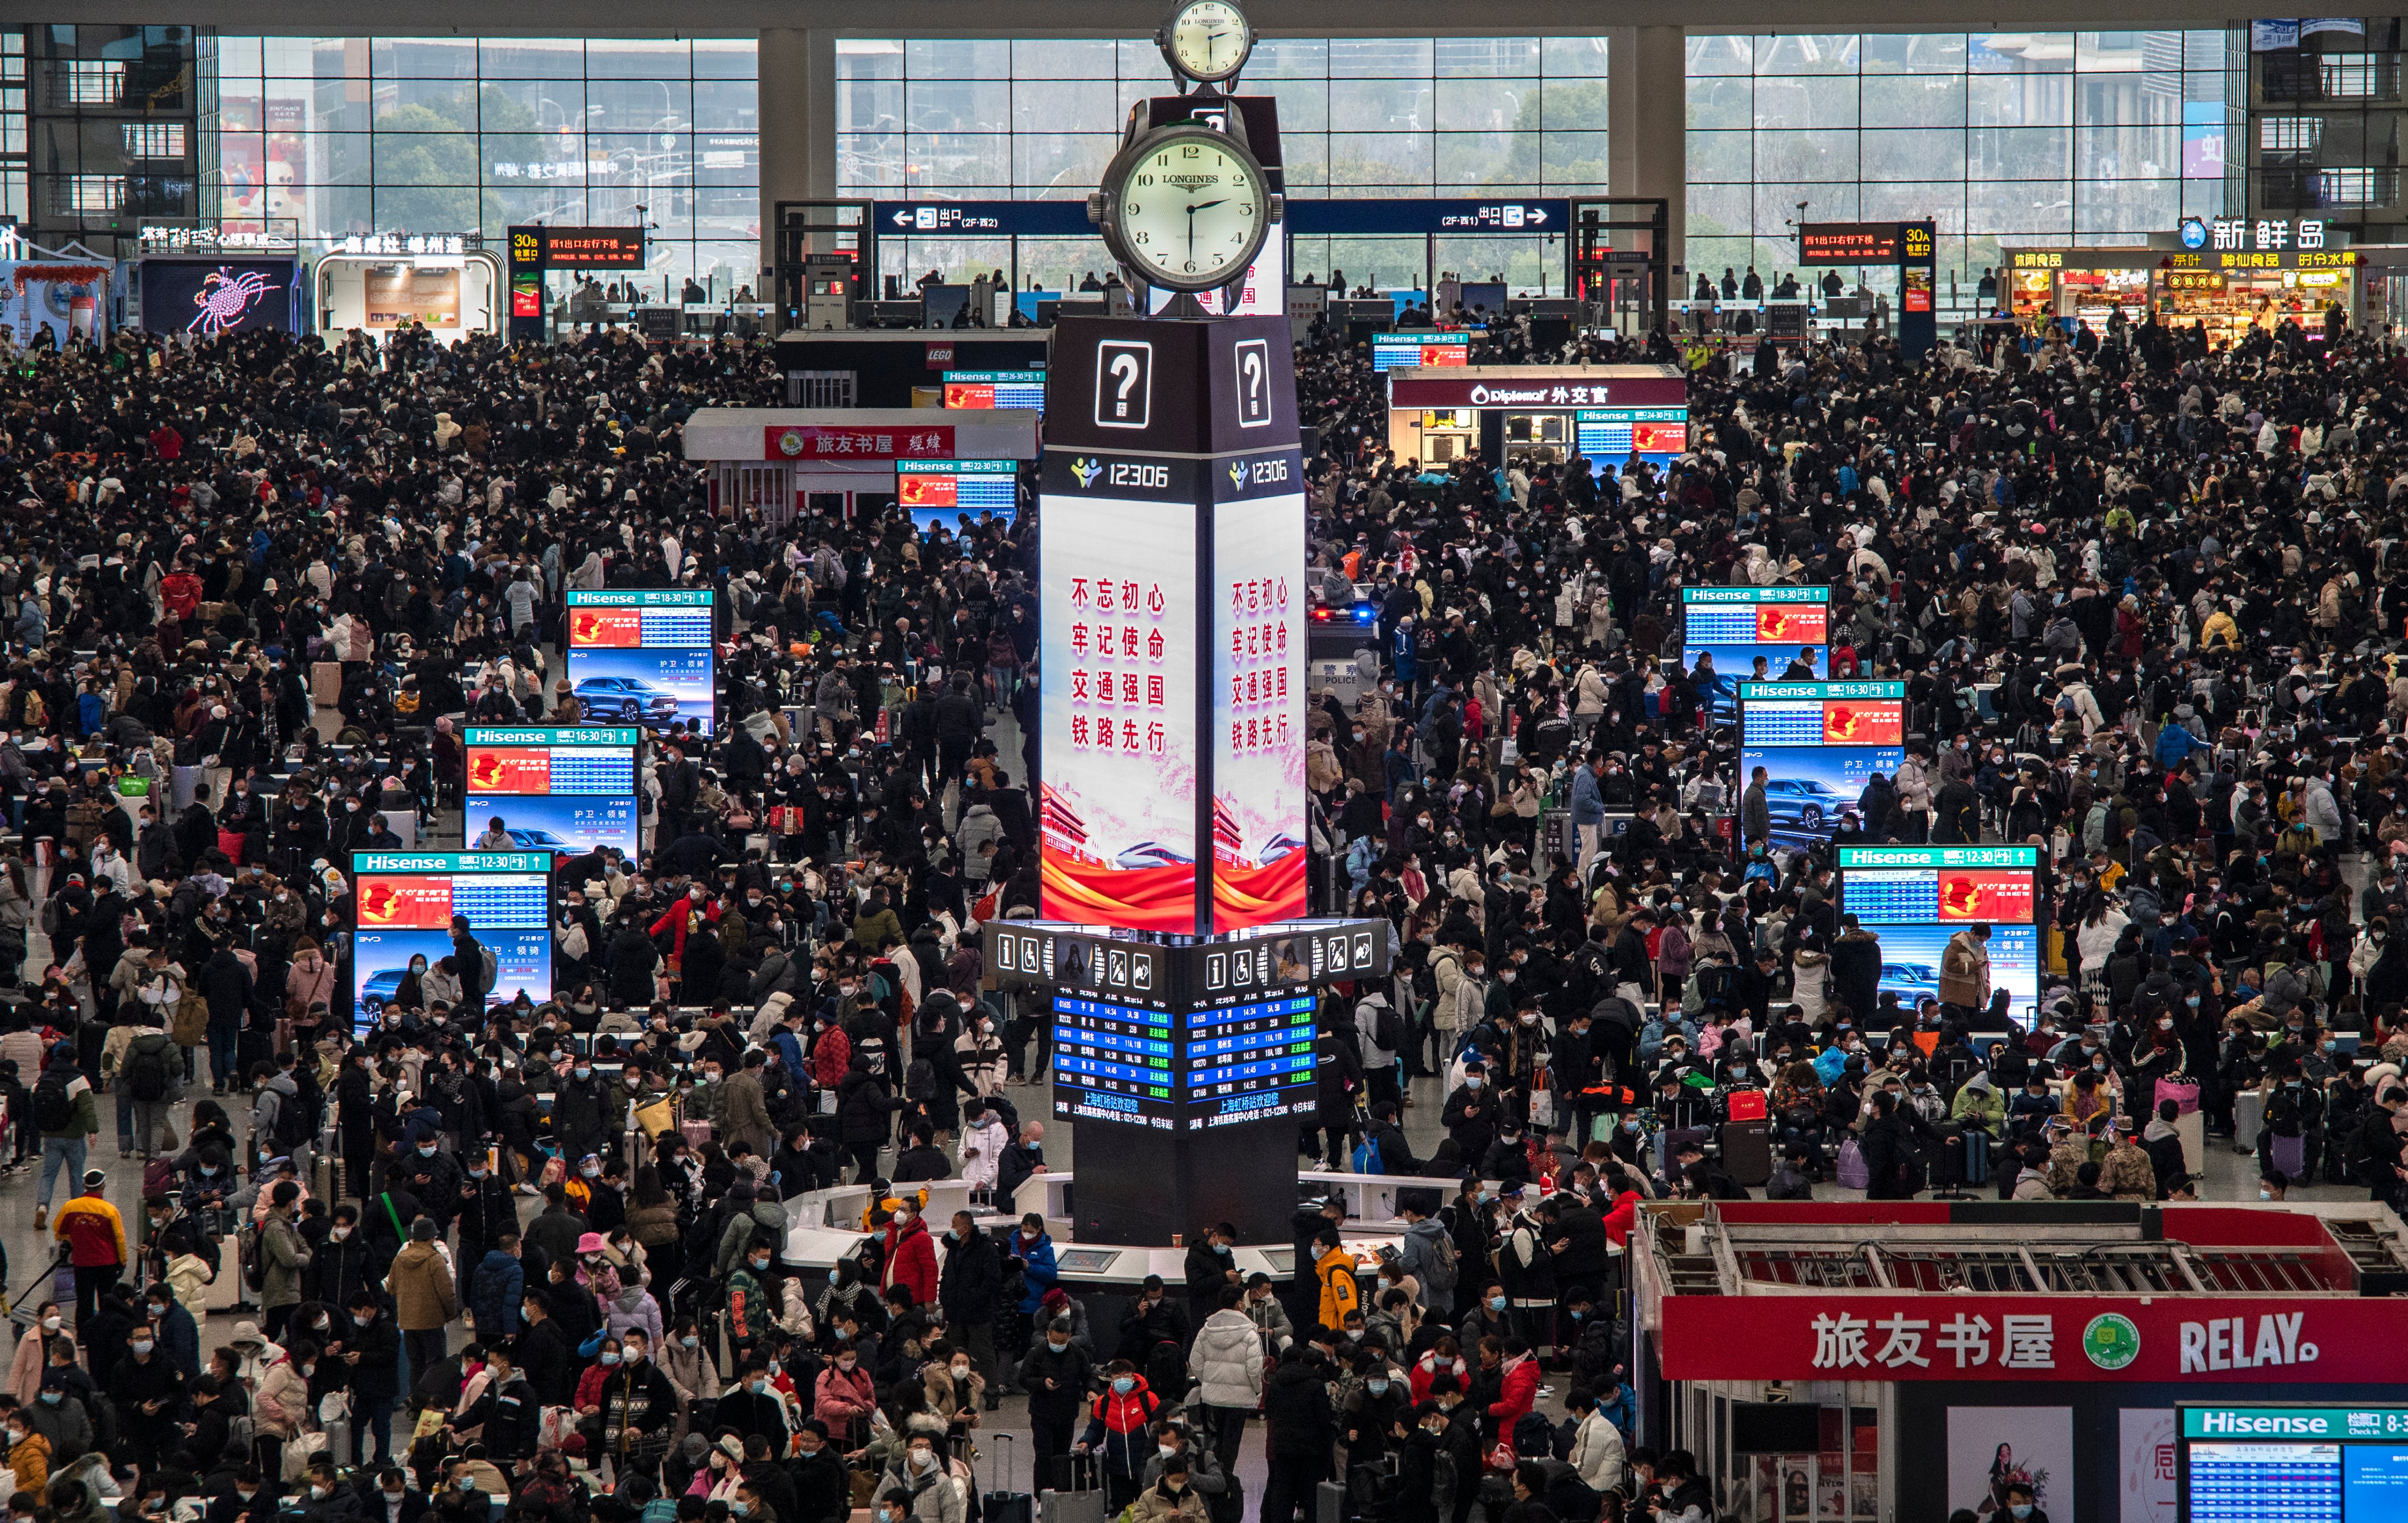 Travelers crowd at the gates and wait for trains at the Shanghai Hongqiao Railway Station during the peak travel rush for the upcoming Chinese New Year holiday, Jan. 15, 2023. (Kevin Frayer—Getty Images)